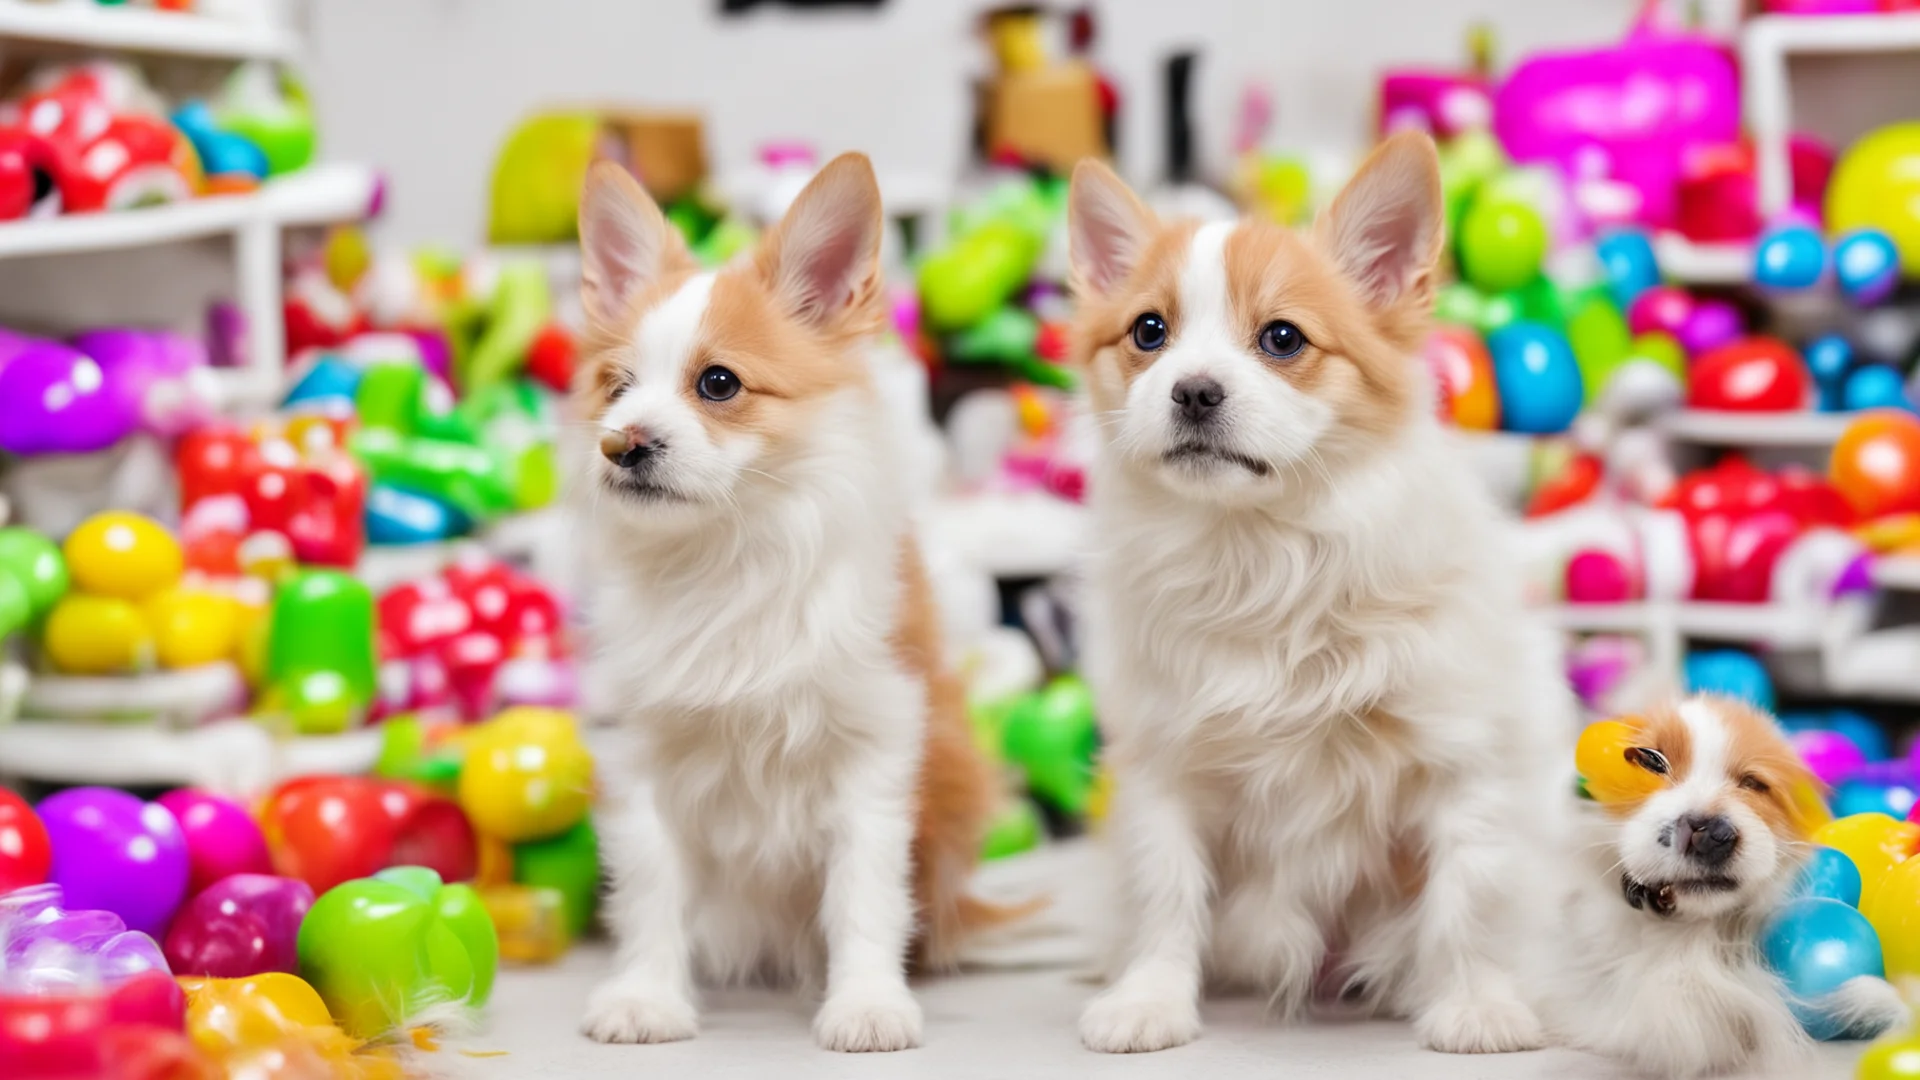 amazing image for main page of pet supplies store awesome portrait 2 wide